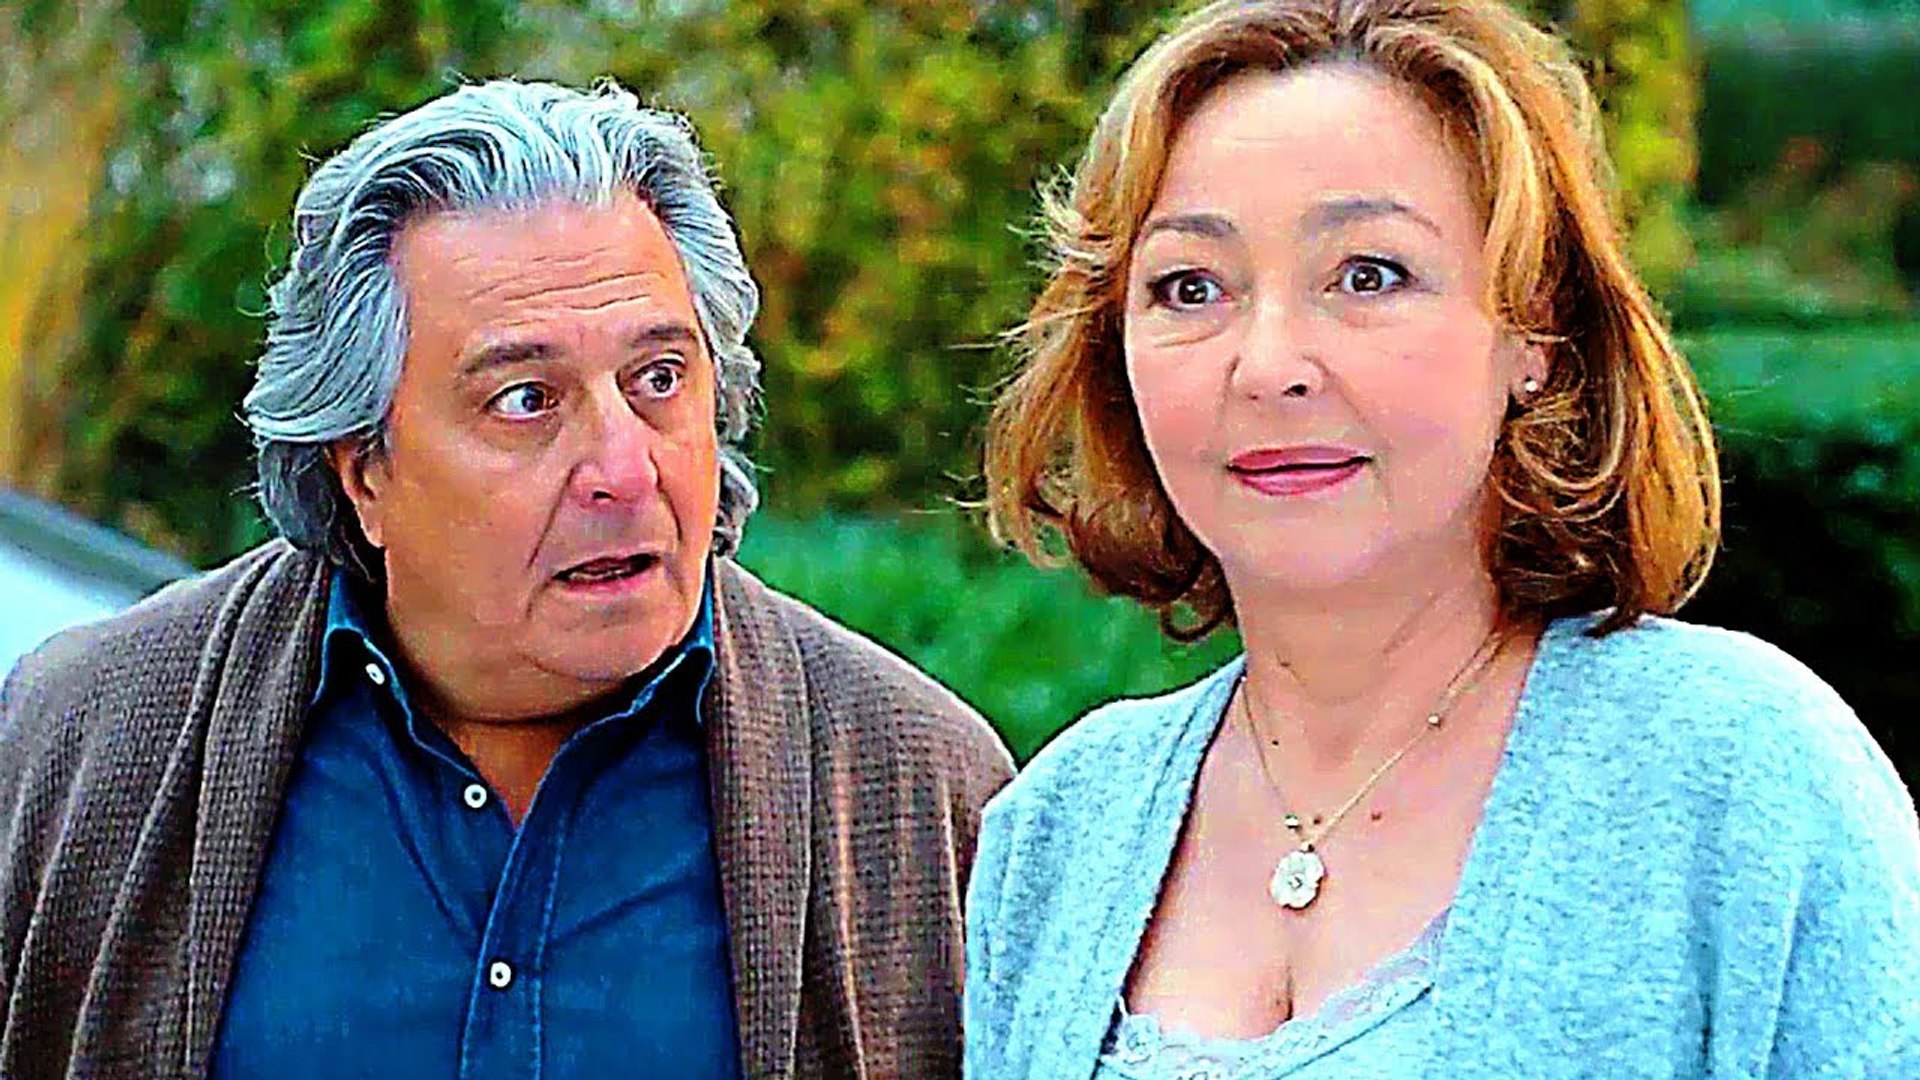 MOMO Bande Annonce ? Christian Clavier, Catherine Frot, Comédie (2017) -  Vidéo Dailymotion